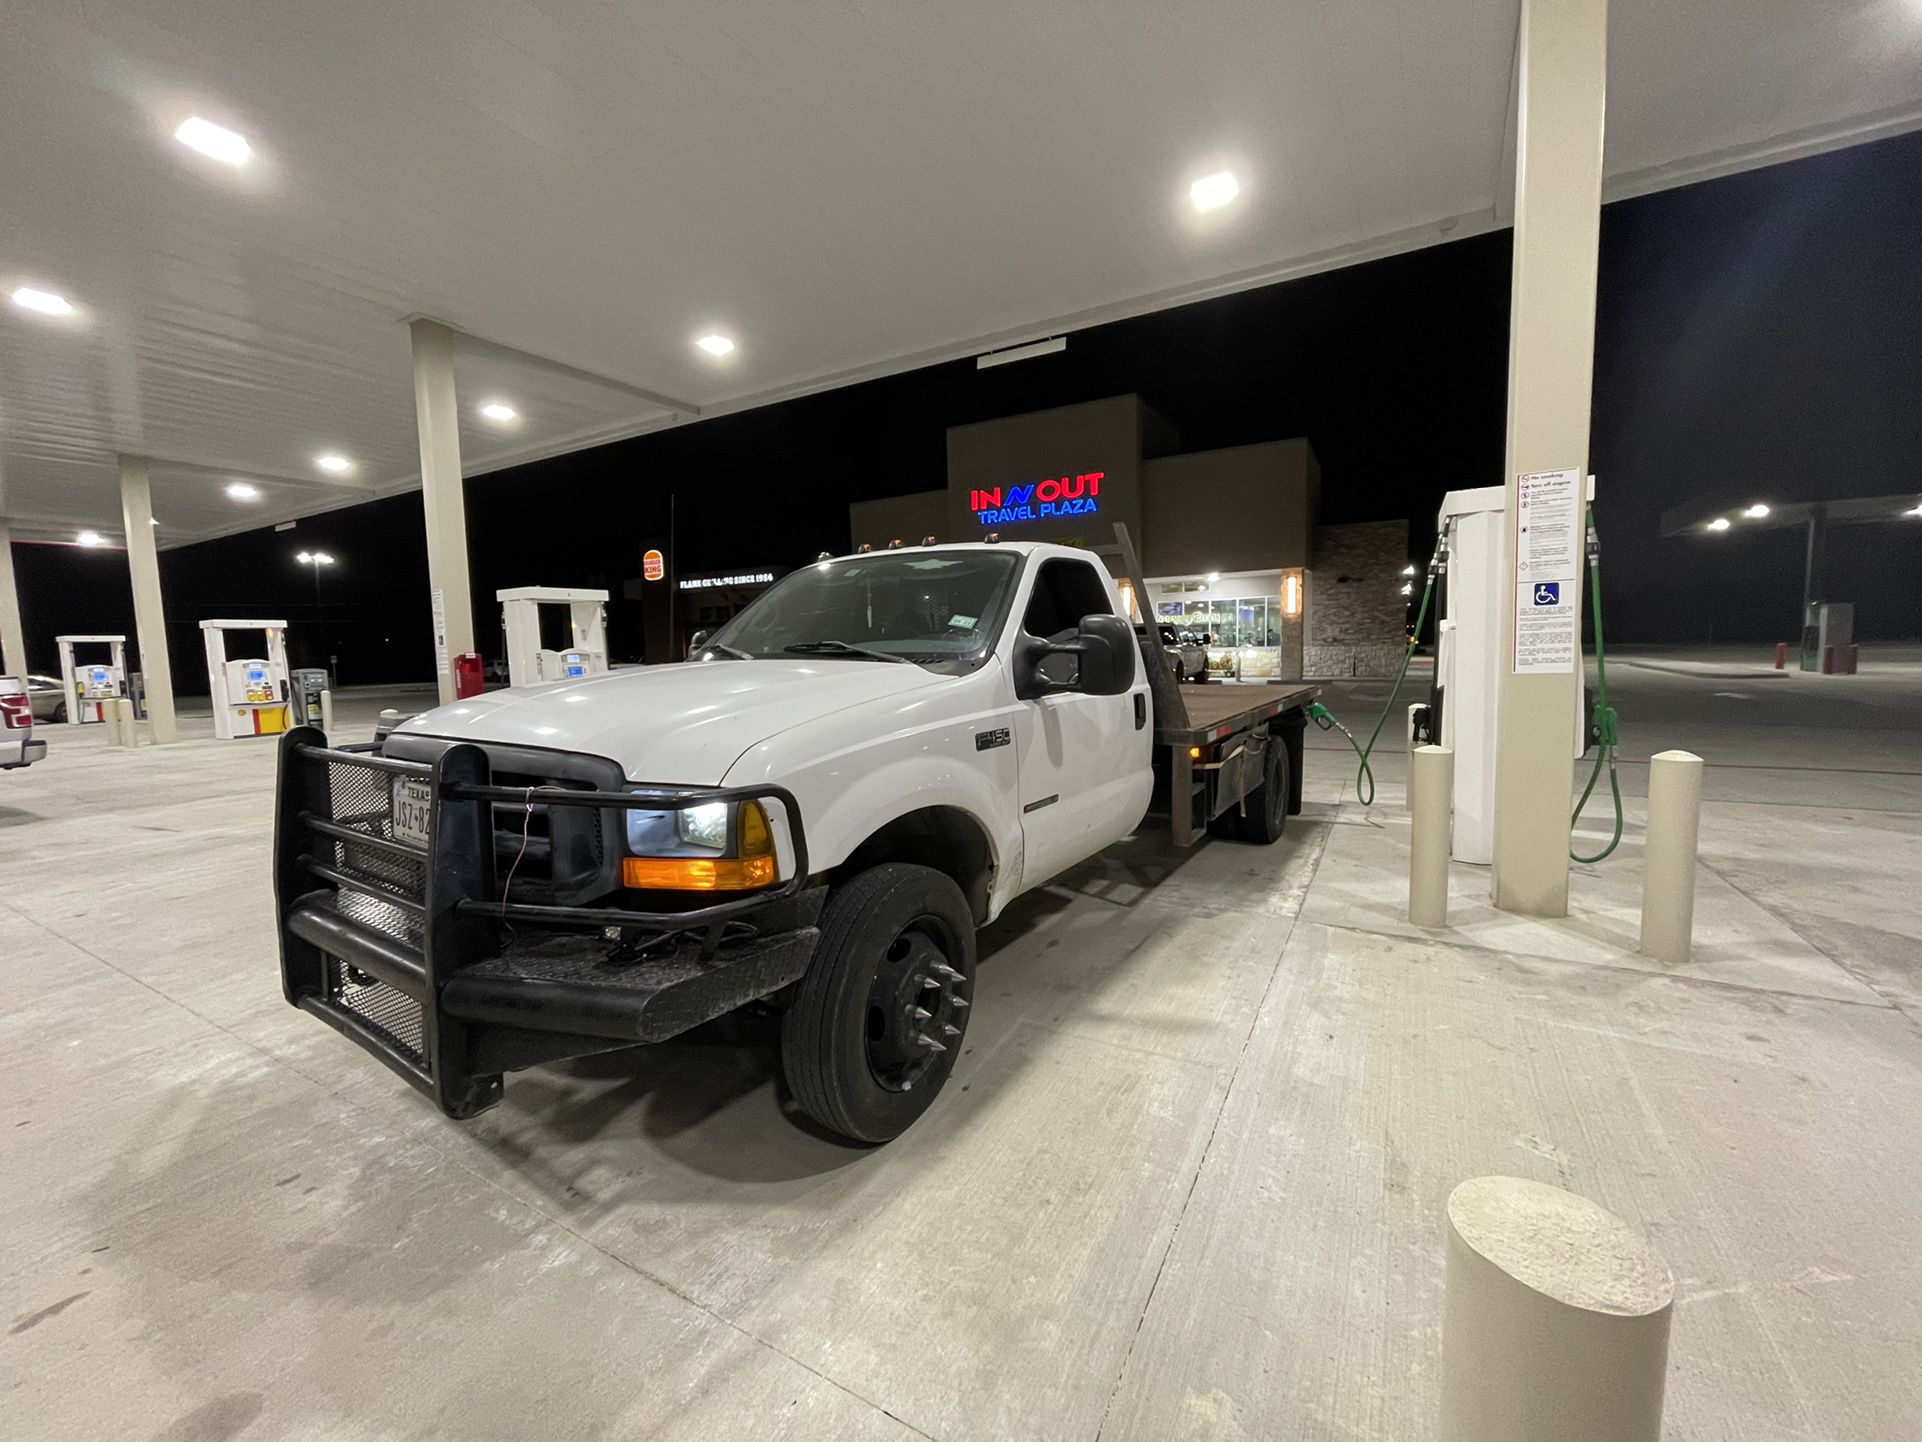 1999 Ford F-450